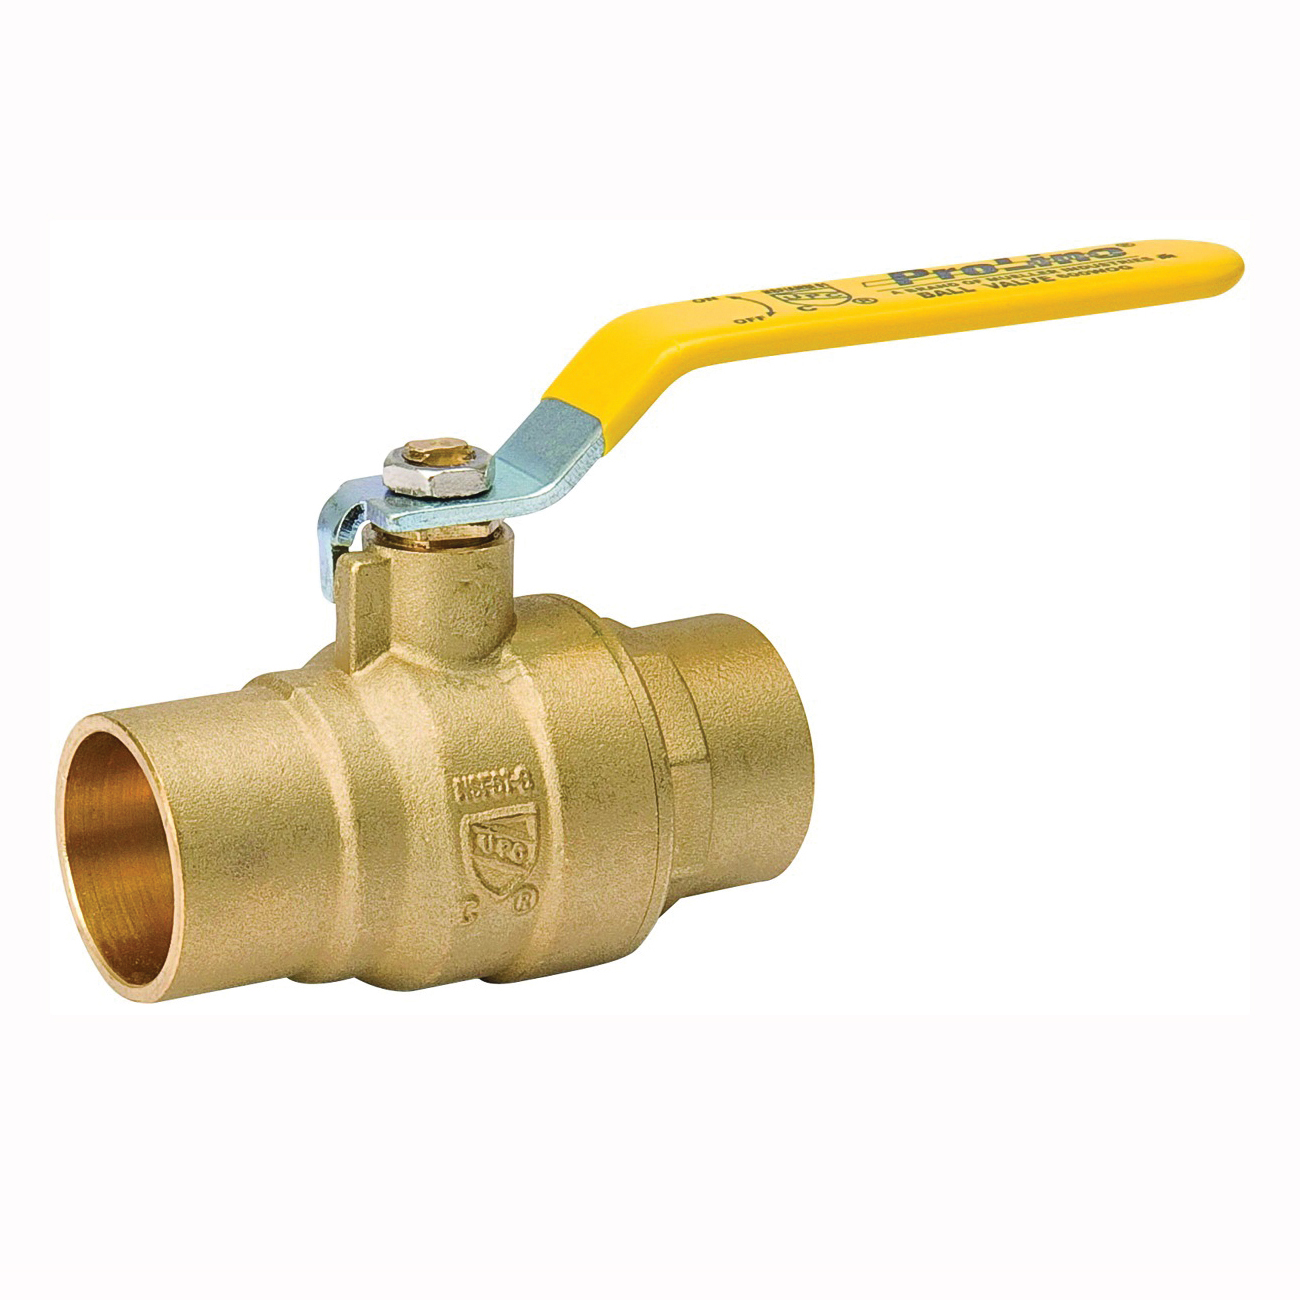 107-854NL Ball Valve, 3/4 in Connection, Solder, 600/125 psi Pressure, Manual Actuator, Brass Body